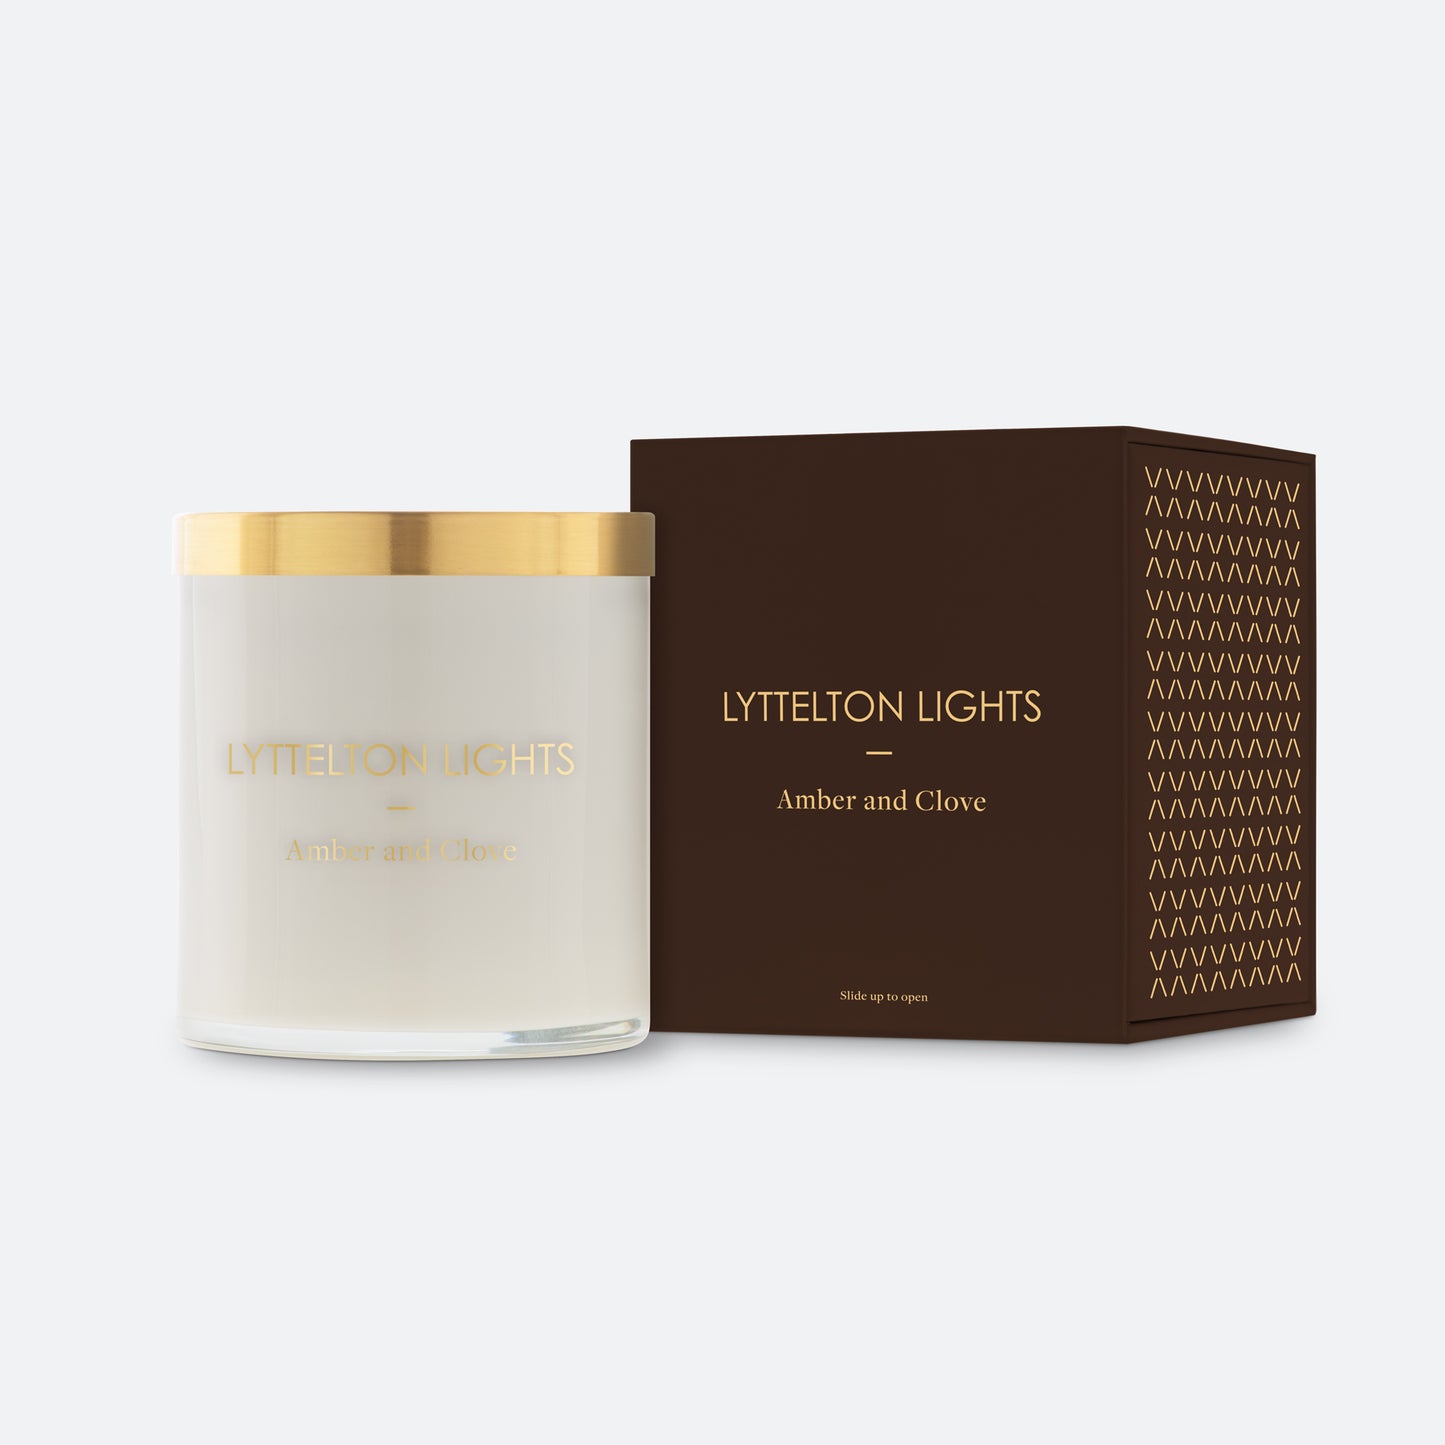 Amber and Clove Candle by Lyttelton Lights